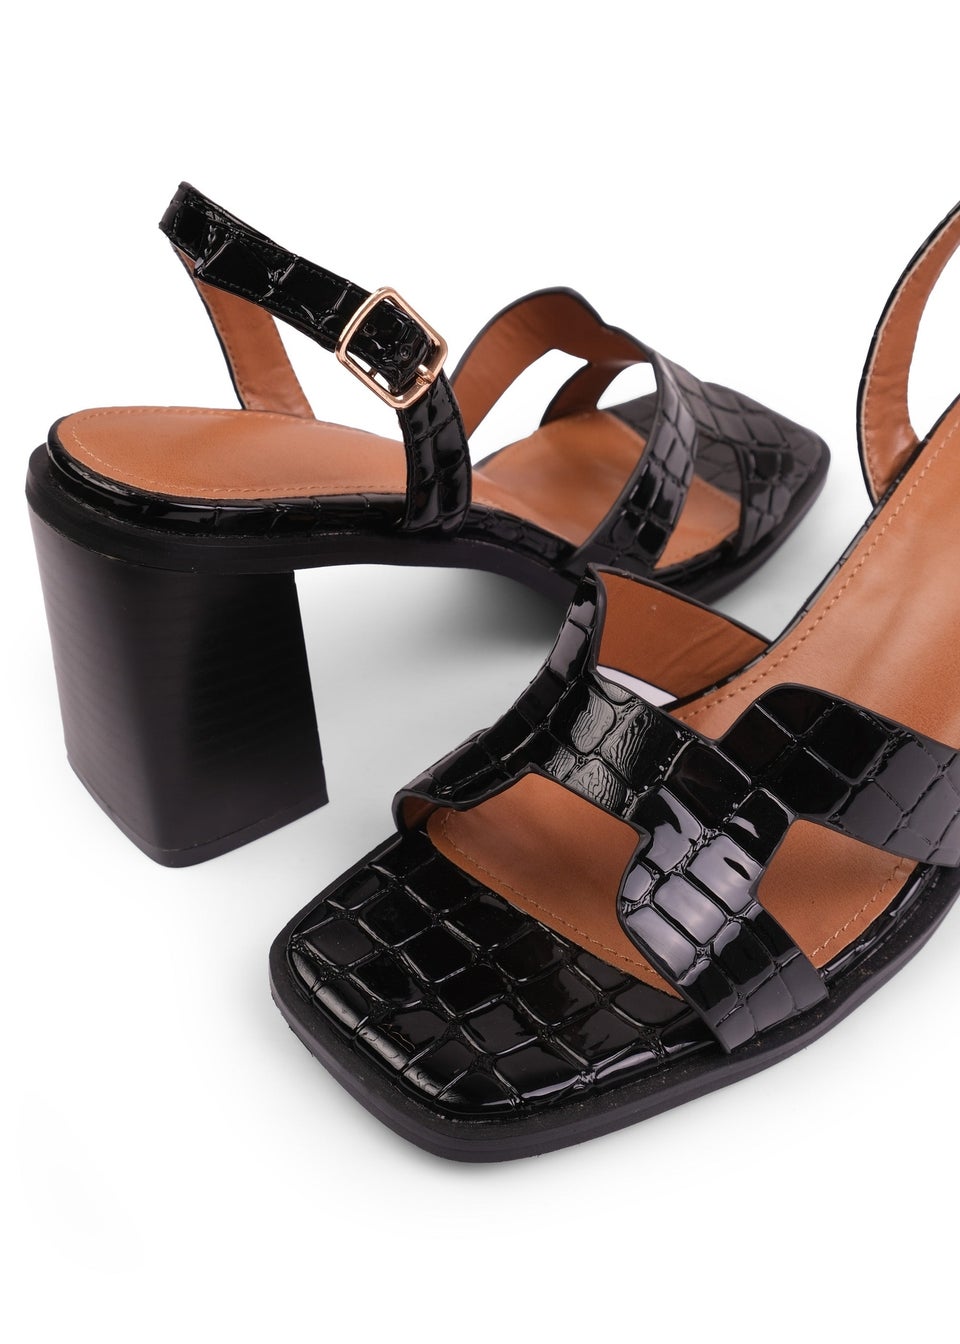 Where's That From Black Croc Patent Stylite Strappy Block Heel Sandals